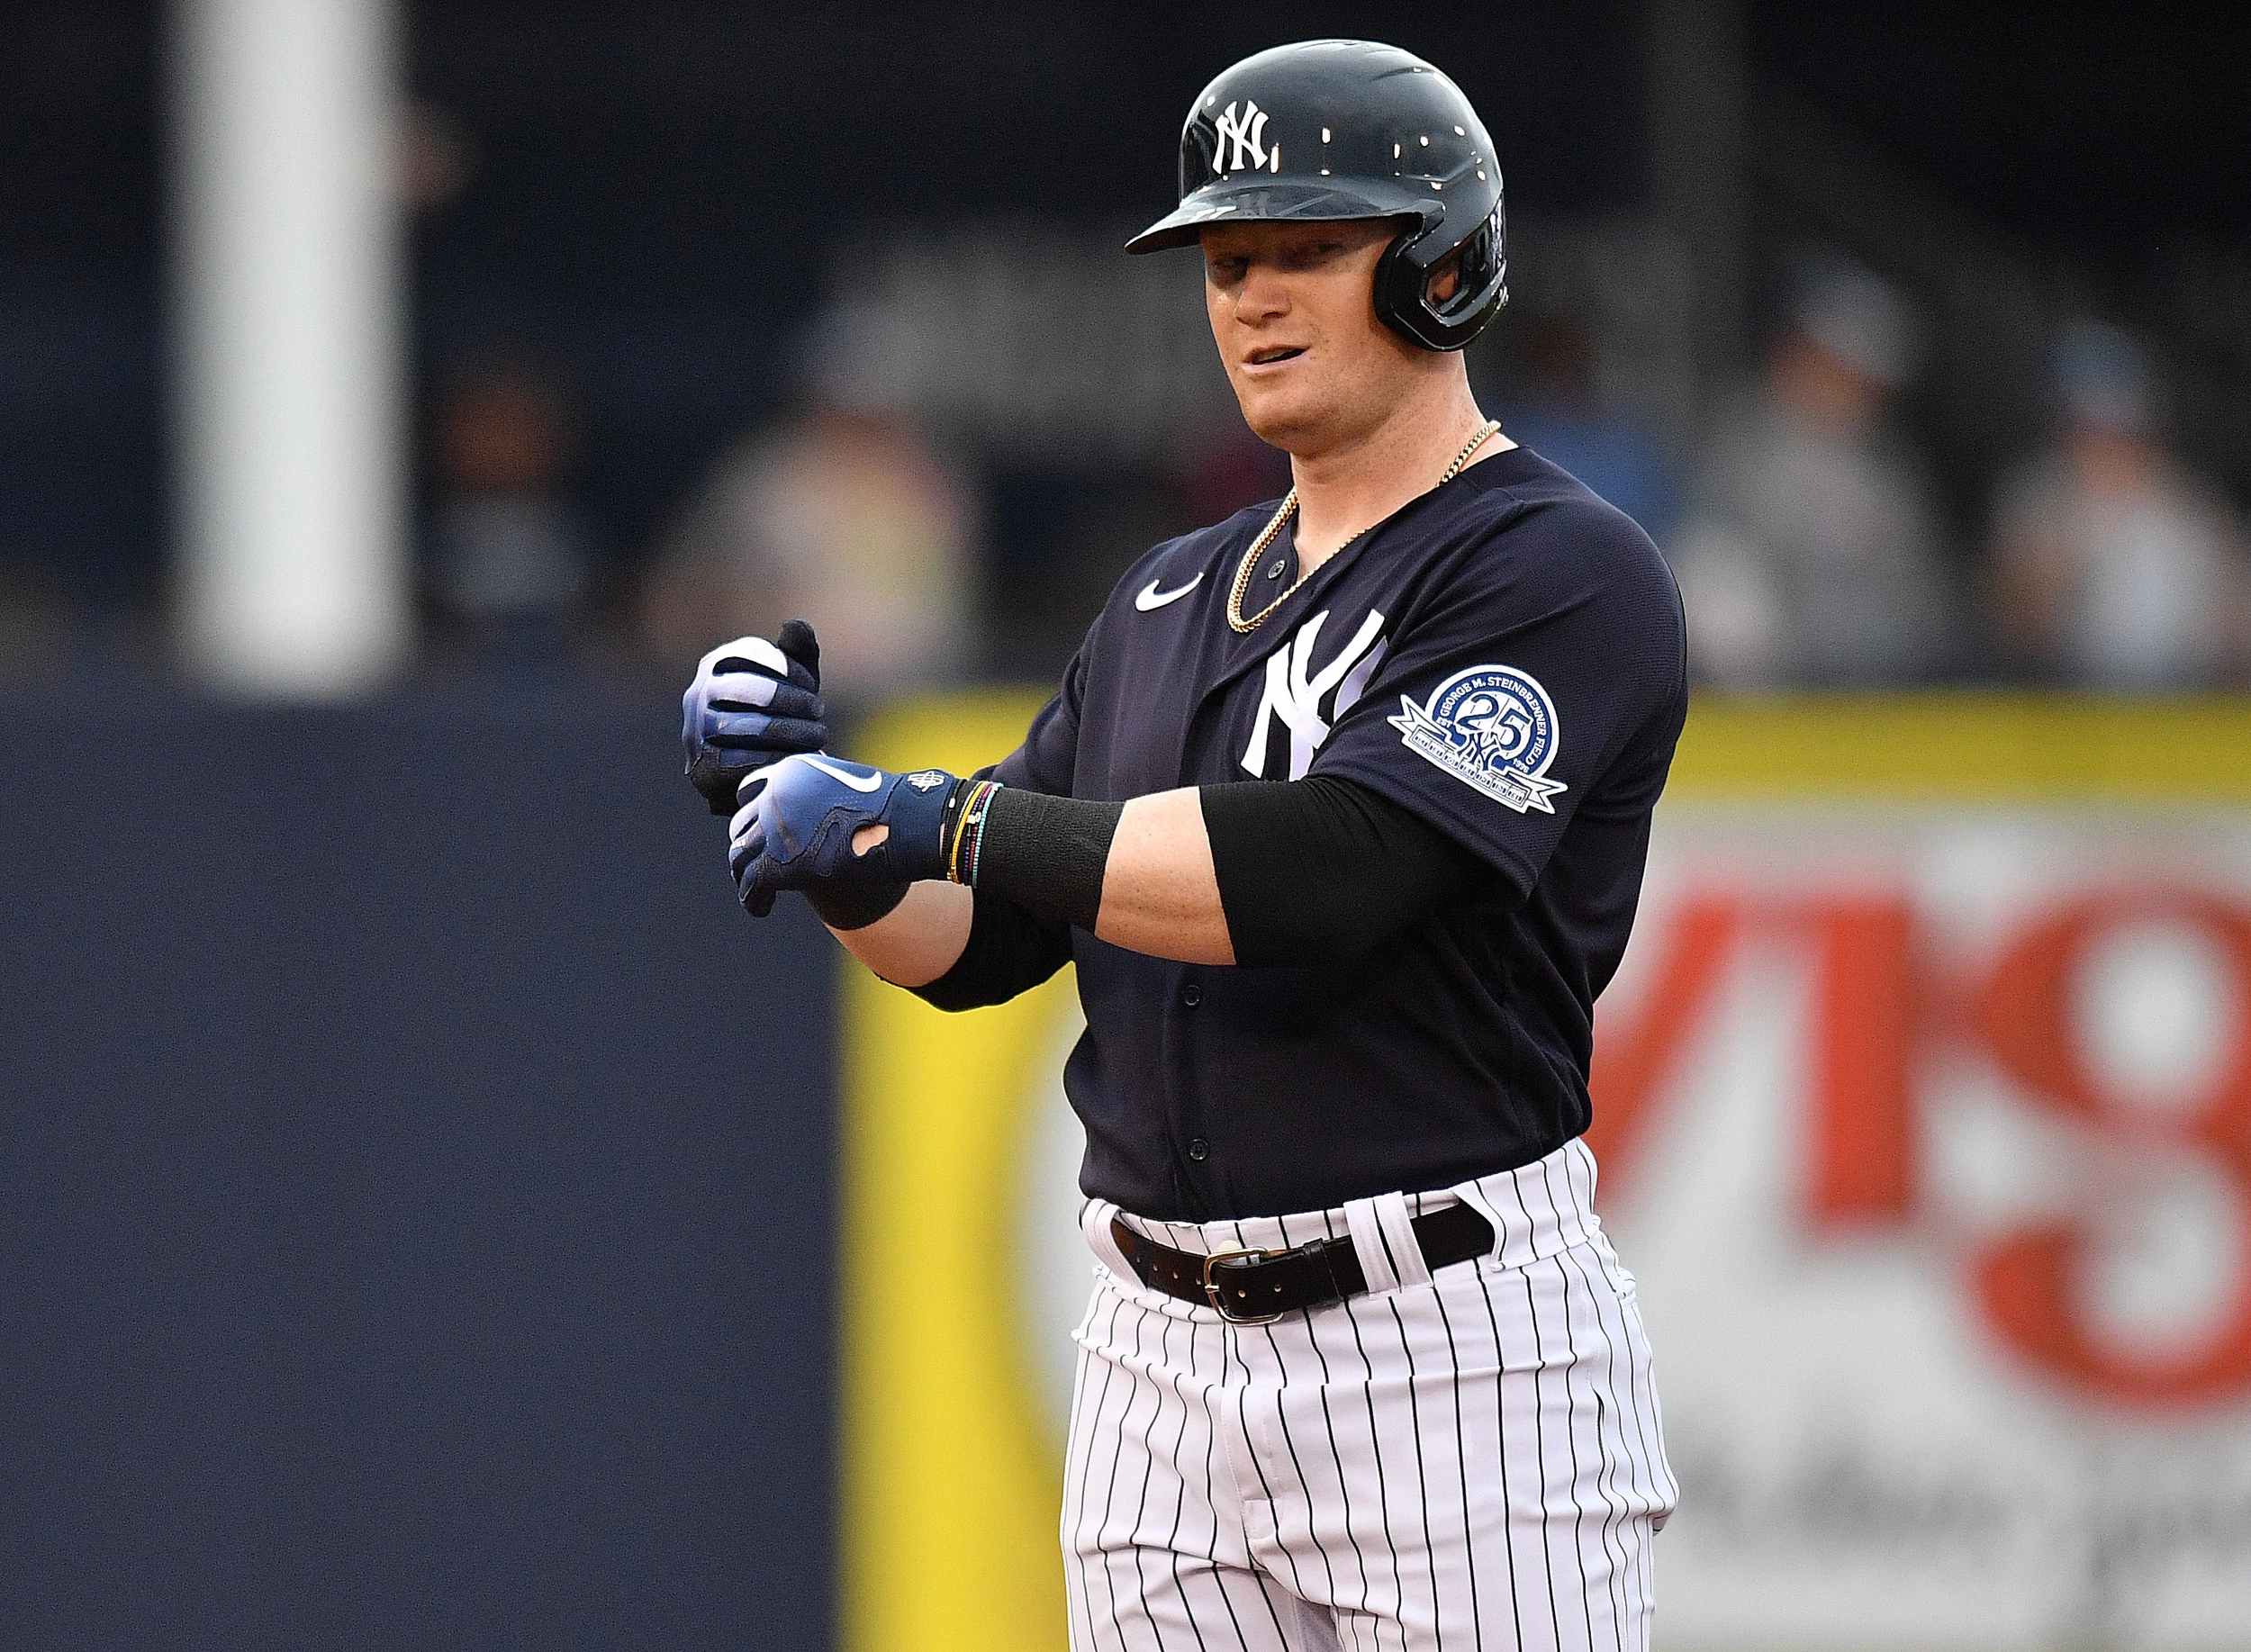 Clint Frazier uses a funky new bat modeled after him: hair